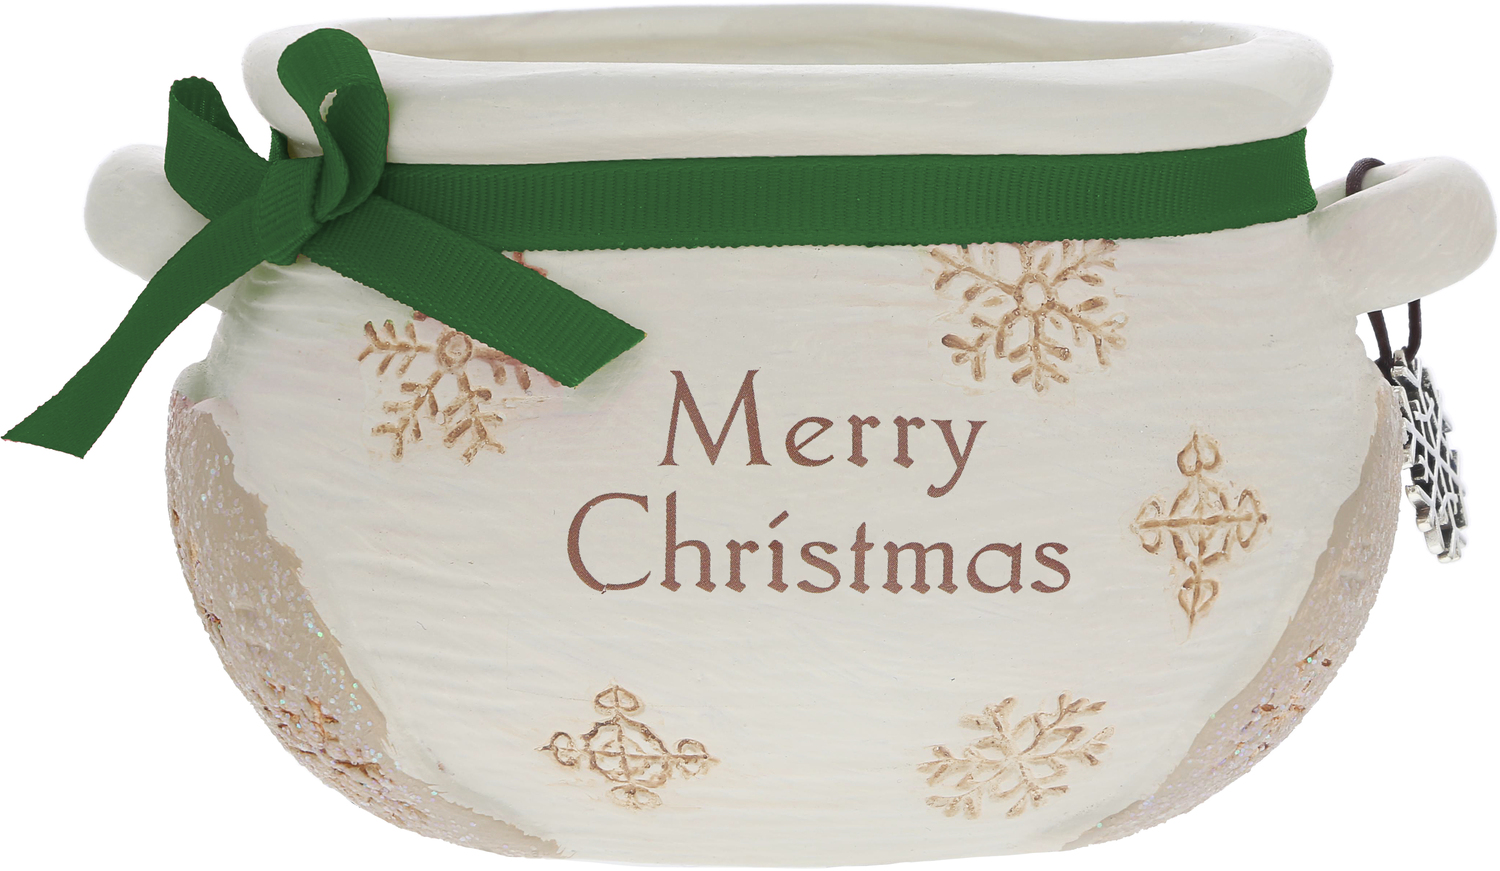 Merry Christmas by The Birchhearts - Merry Christmas - 9 oz - 100% Soy Wax Reveal Candle
Scent: Winter Snow